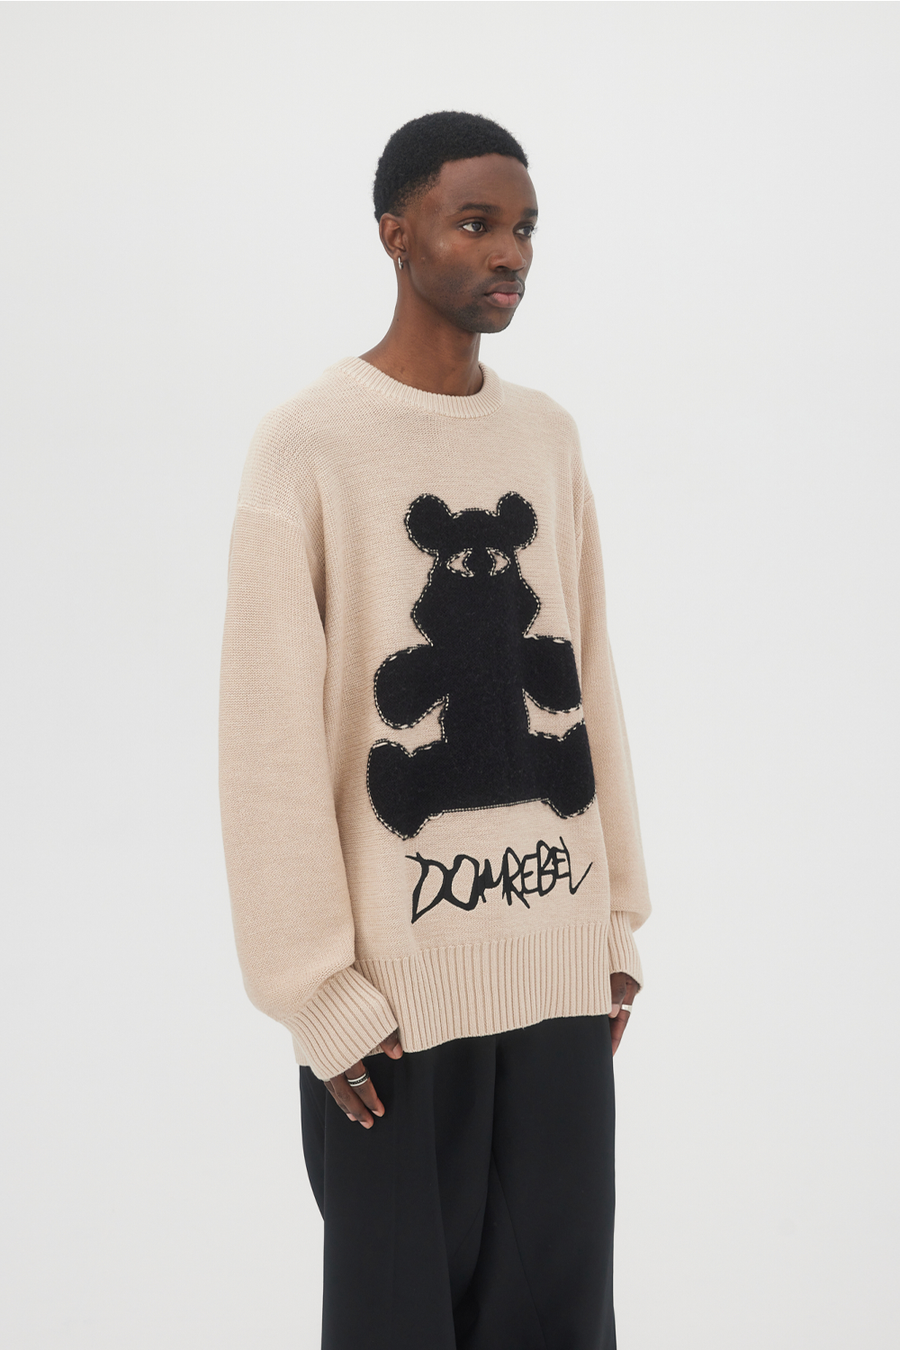 Buy the Domrebel Bearclops Knit Crewneck Beige at Intro. Spend £50 for free UK delivery. Official stockists. We ship worldwide.